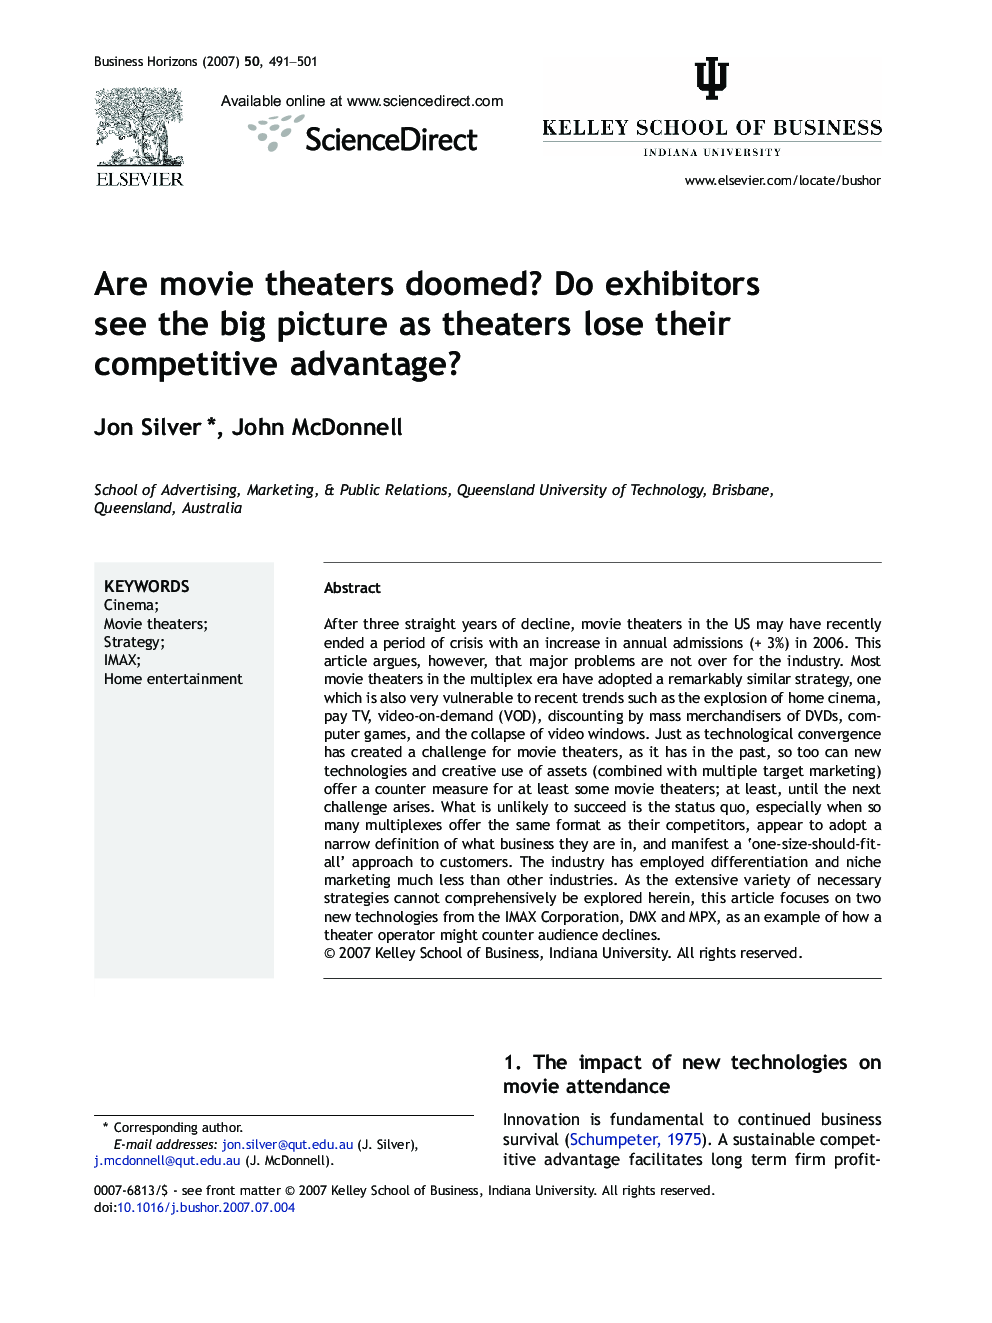 Are movie theaters doomed? Do exhibitors see the big picture as theaters lose their competitive advantage?